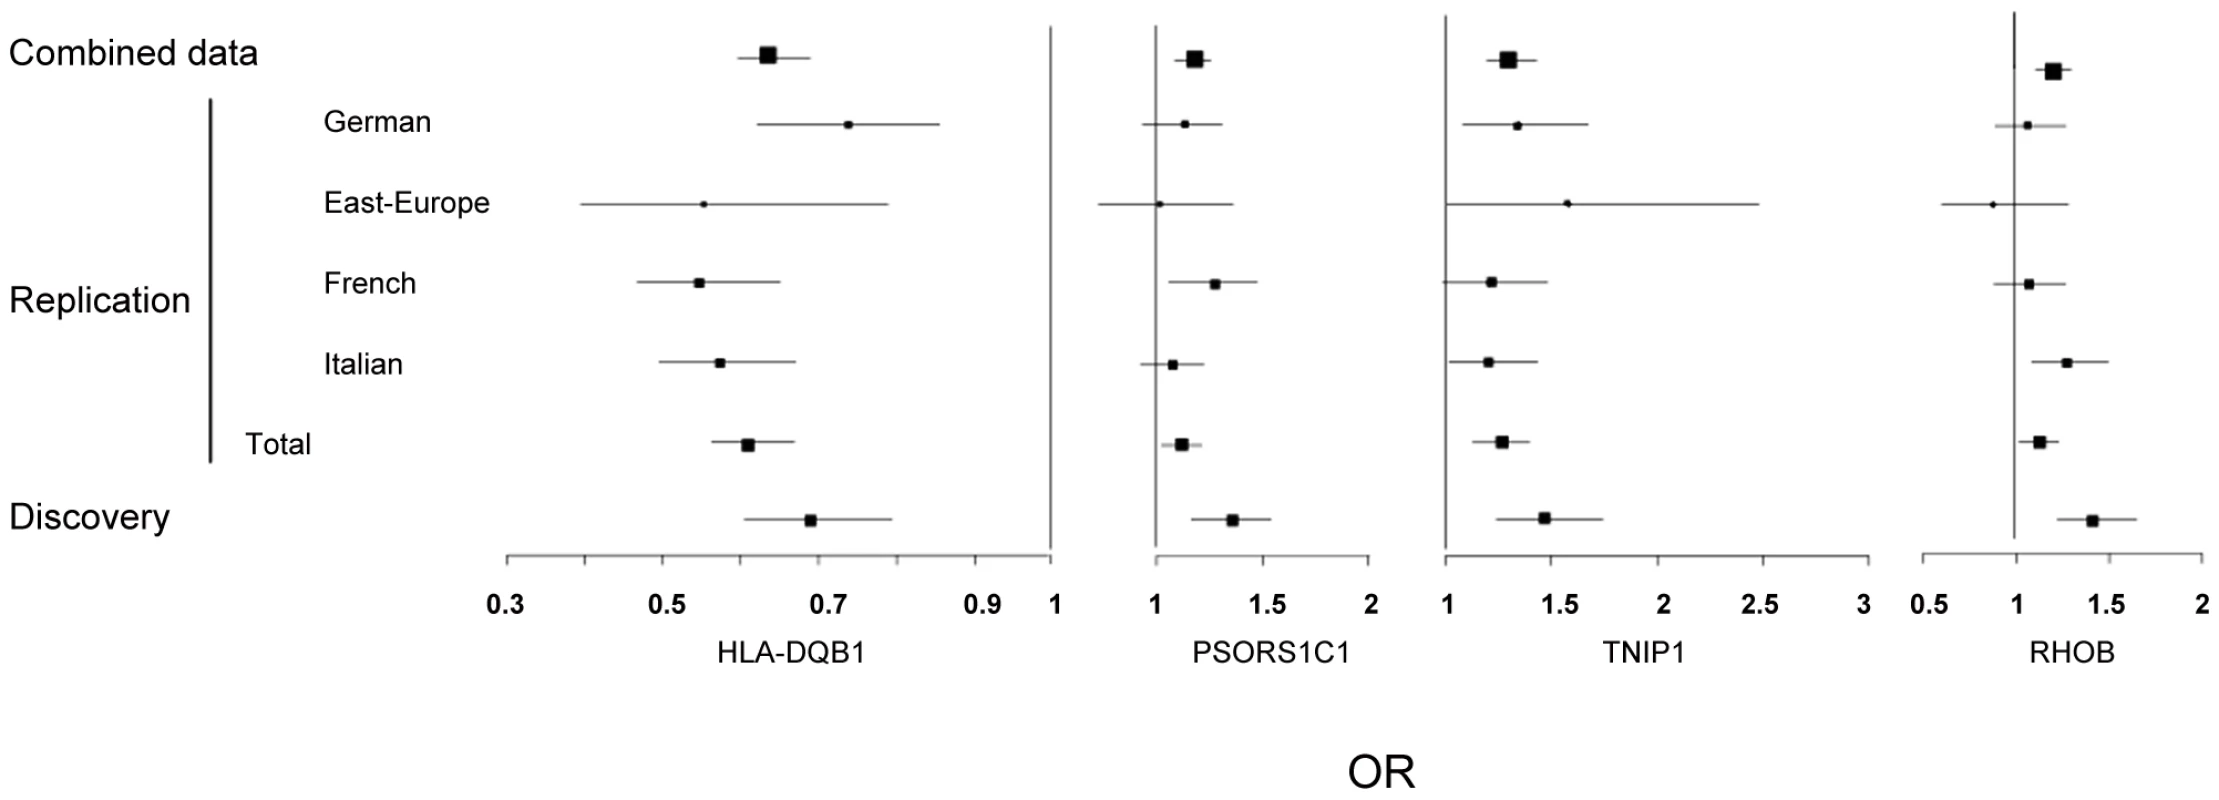 Forest plots showing odds ratios and confidence intervals of the &lt;i&gt;HLA-DQB1&lt;/i&gt;, &lt;i&gt;PSORS1C1&lt;/i&gt;, &lt;i&gt;TNIP1&lt;/i&gt;, and &lt;i&gt;RHOB&lt;/i&gt; associations in the various populations studied in stage-1 and stage-2 data.